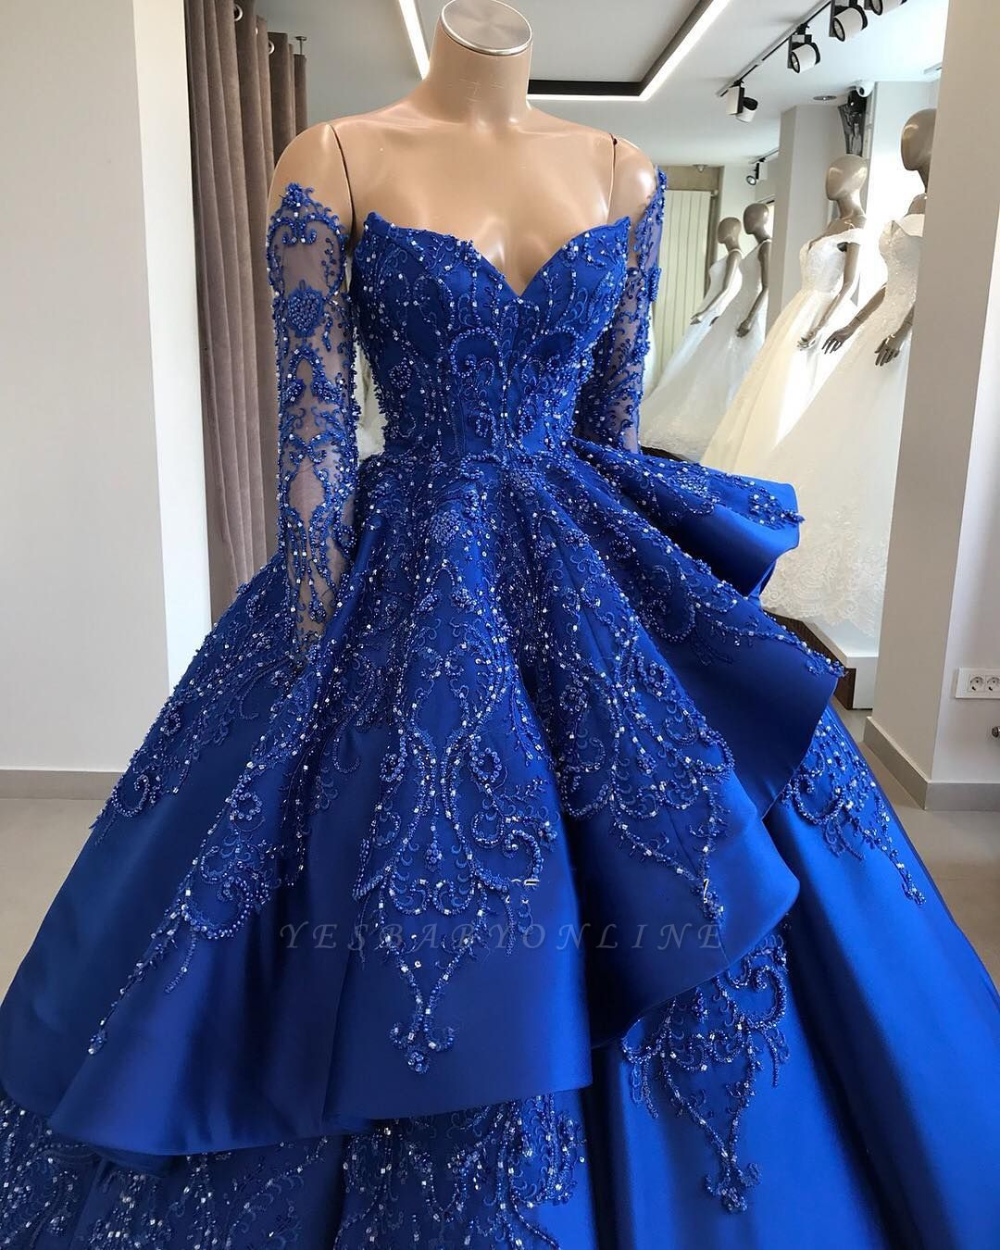 Gorgeous Royal Blue Lace Ruffled Prom Dress | Strapless Sweetheart